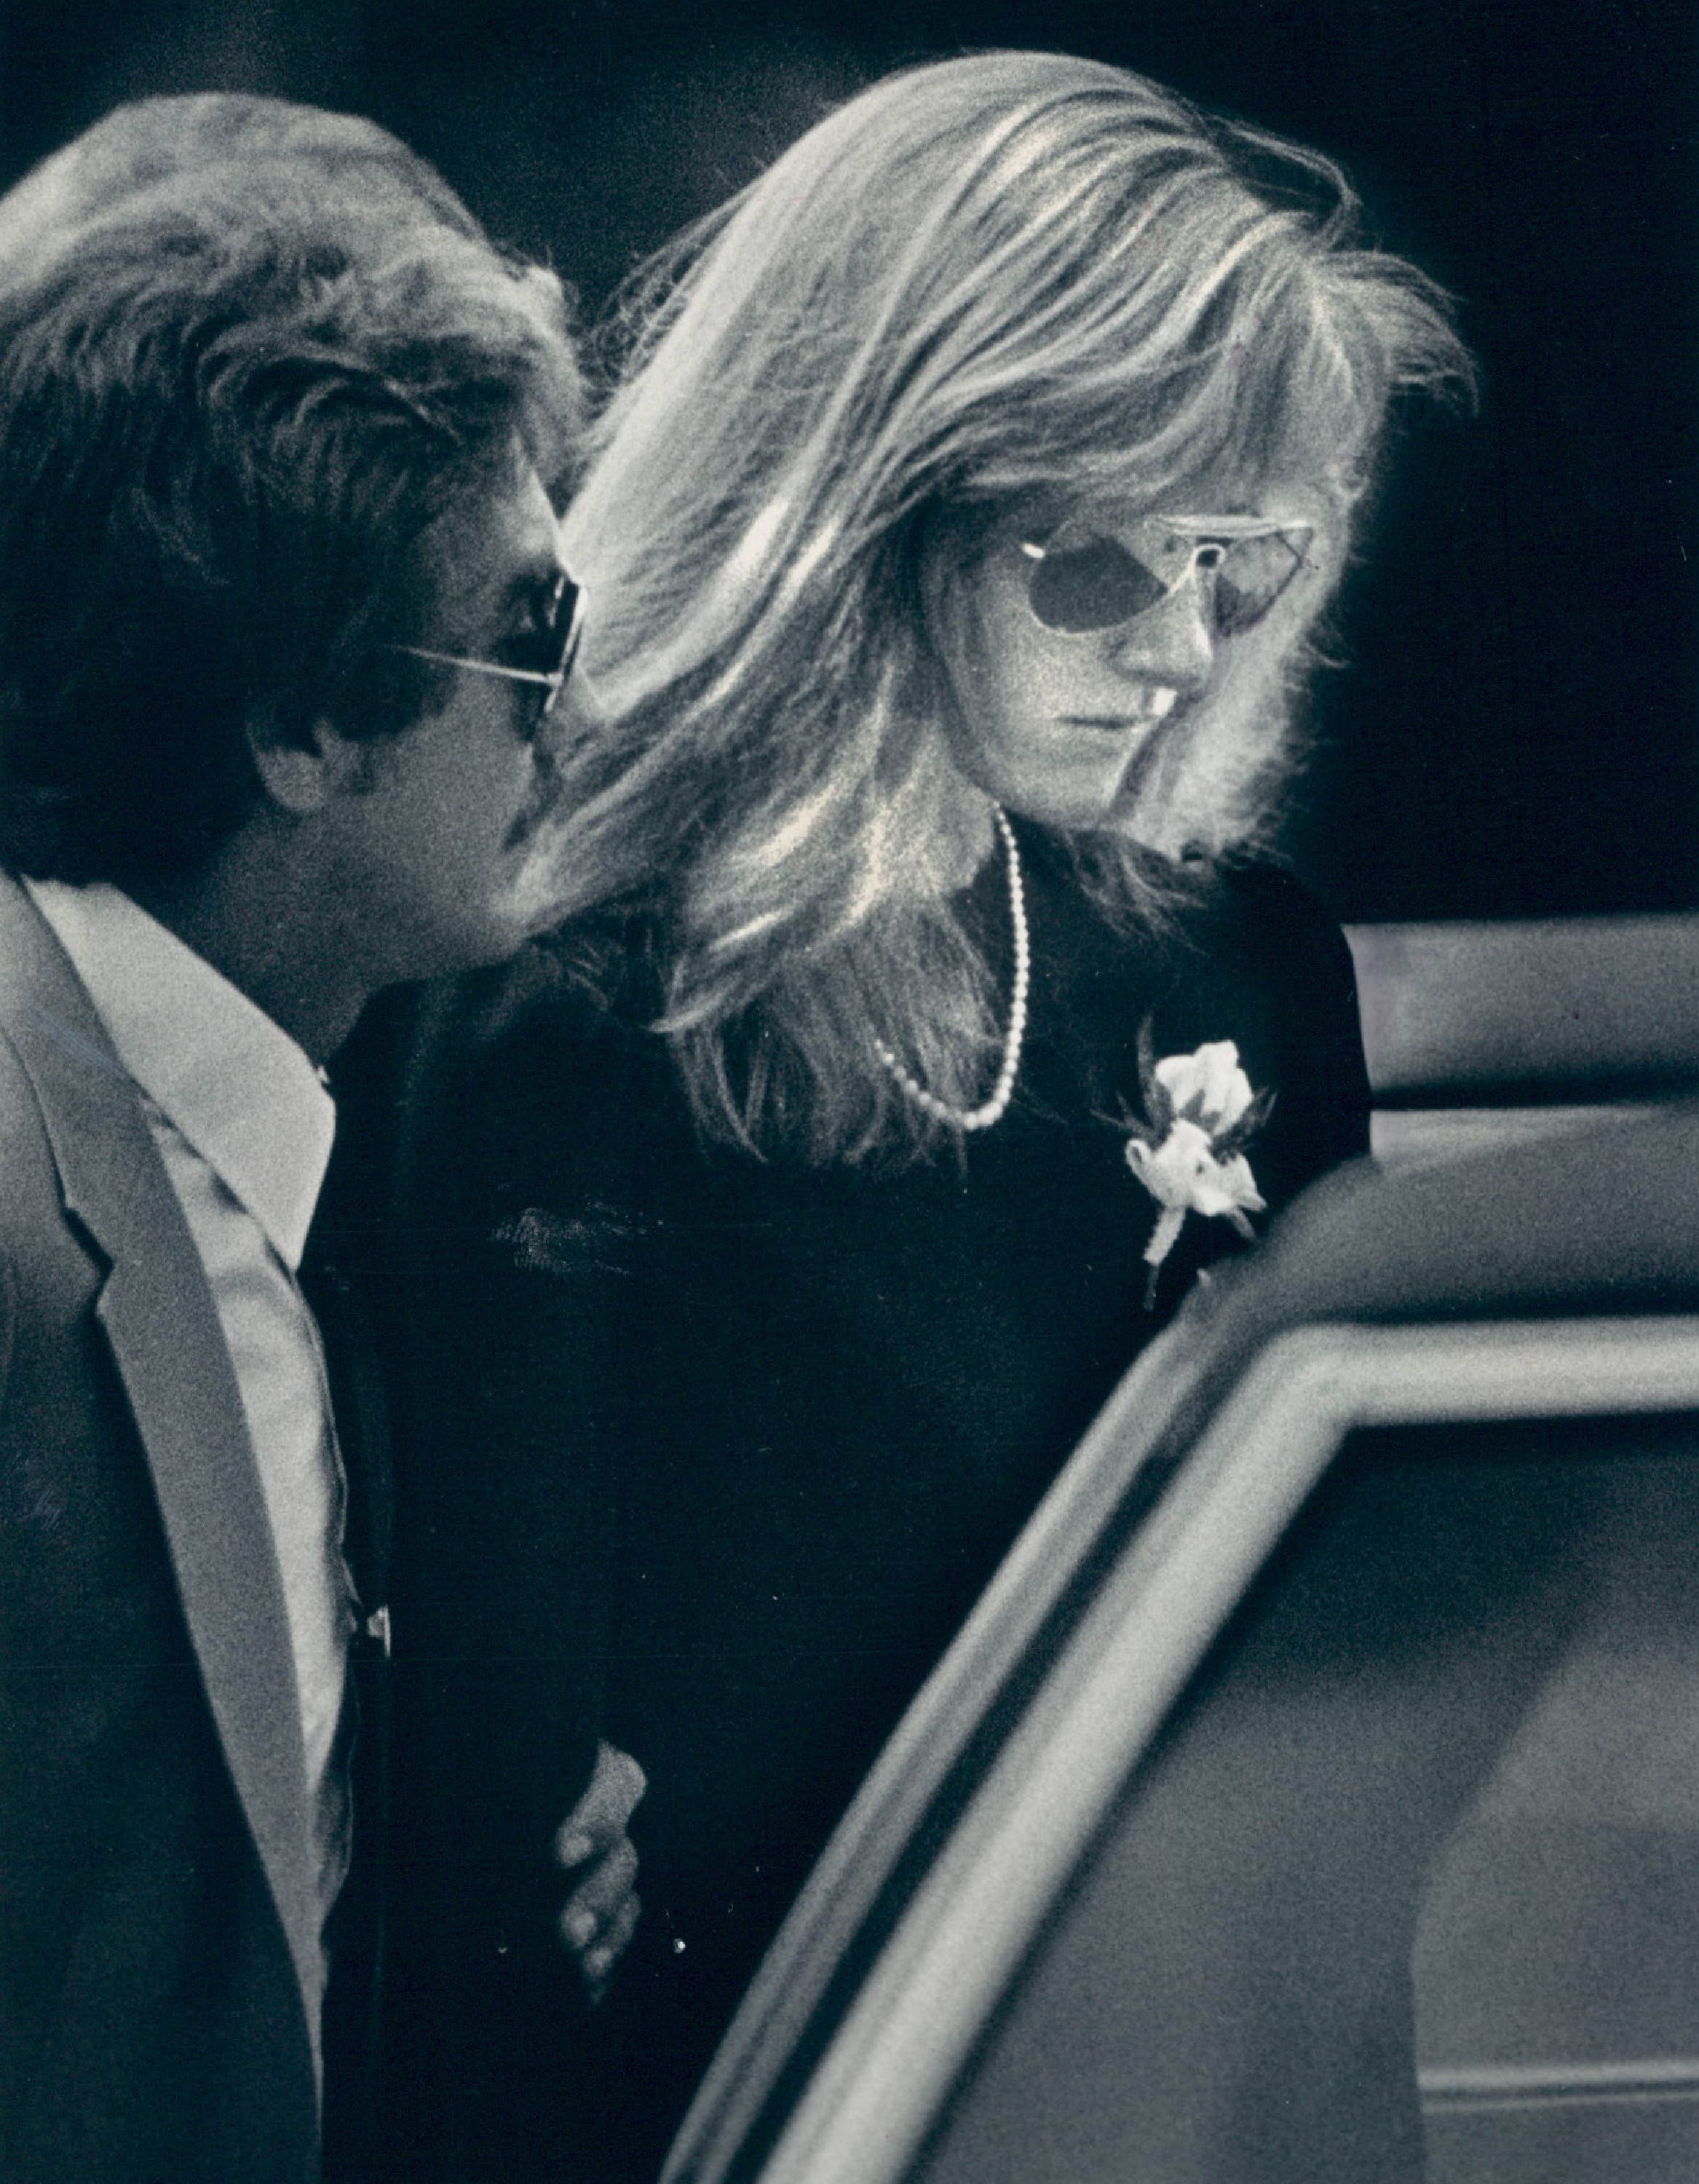 Shauna Redford attends the funeral services of Sid Wells in July 1983 in Longmont, Colorado. | Source: Getty Images